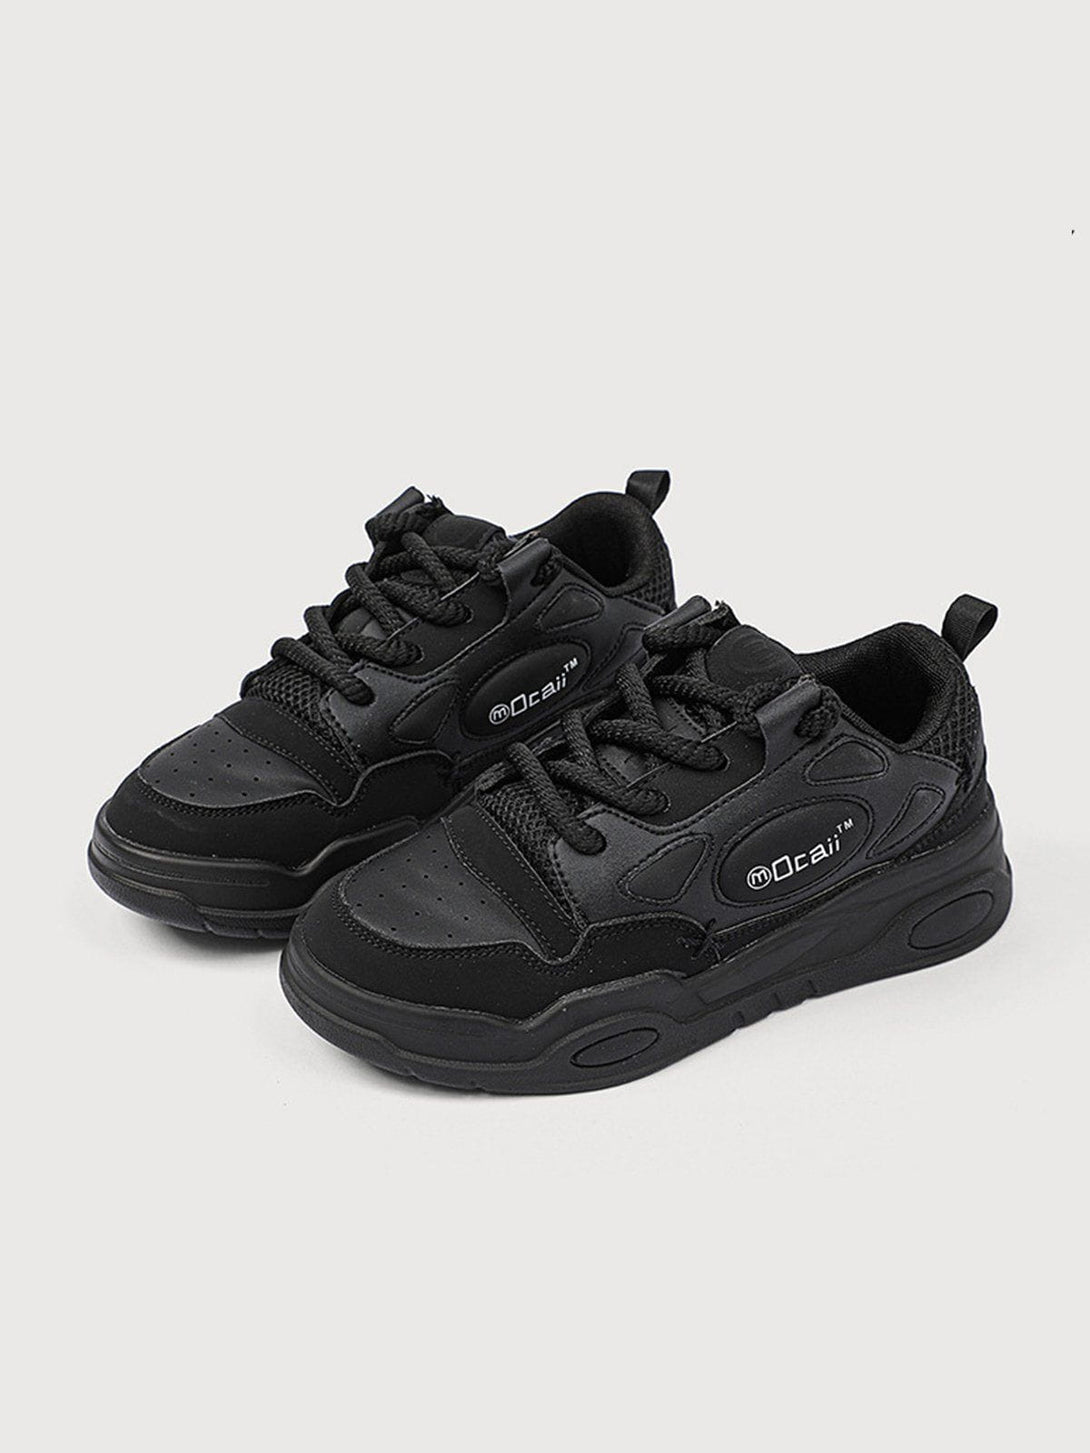 Levefly - Couple Versatile Chunky Heightened Shoes - Streetwear Fashion - levefly.com